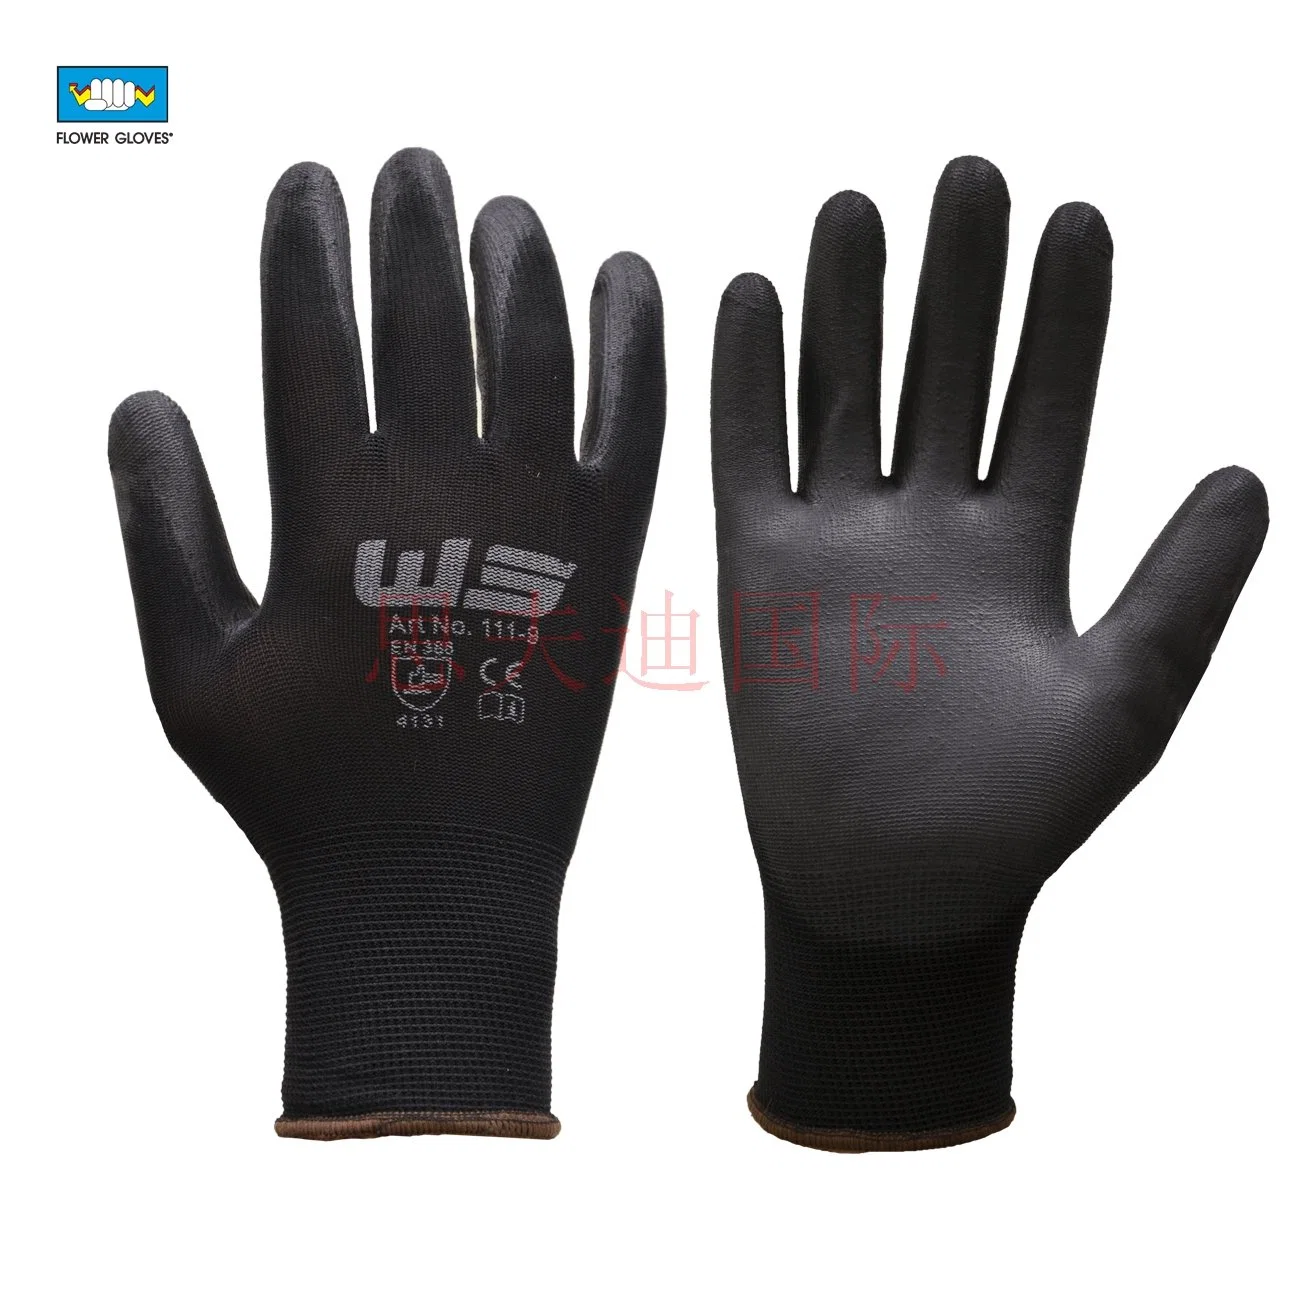 Nitrile Coated Labor Protective Work Gloves